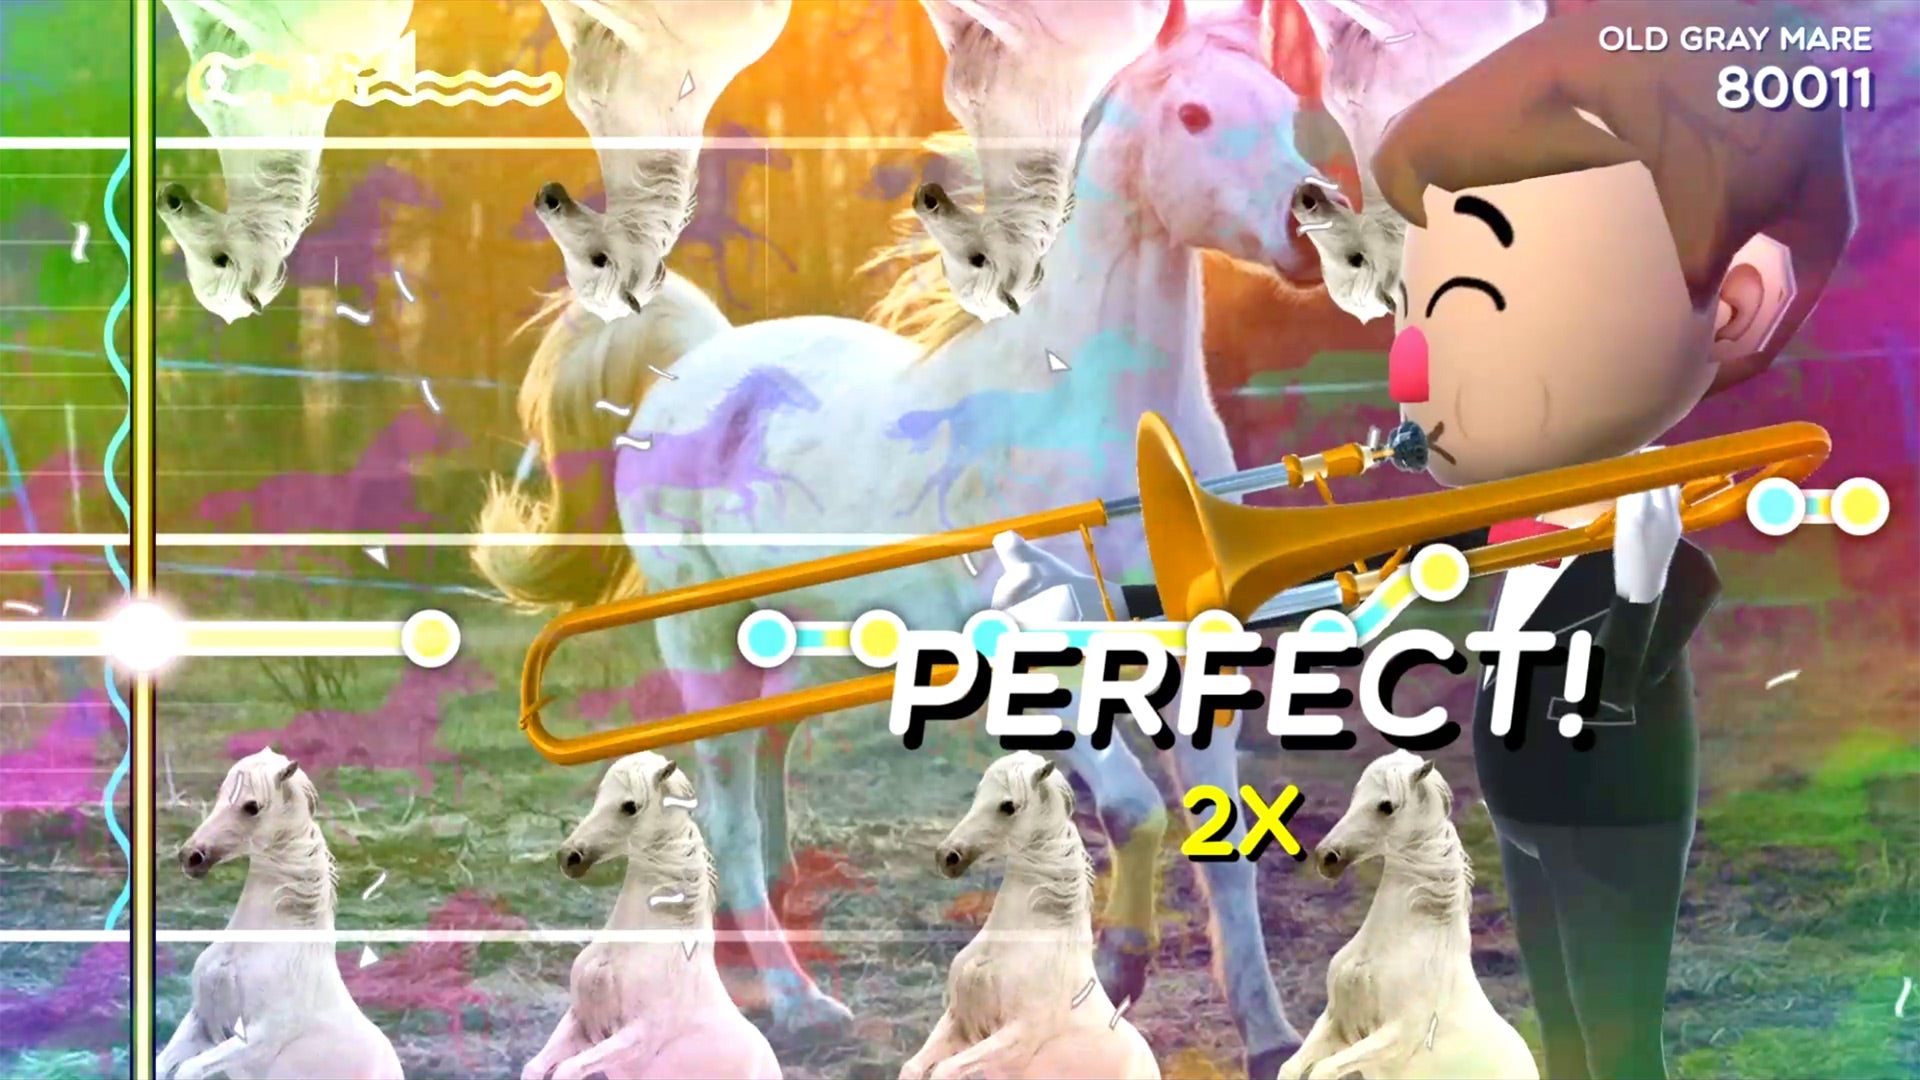 A cartoon man plays a trombone against a background of white horses. Overlaying text reads: "Perfect! 2X." In the top right corner: "Old Gray Mare 80011."